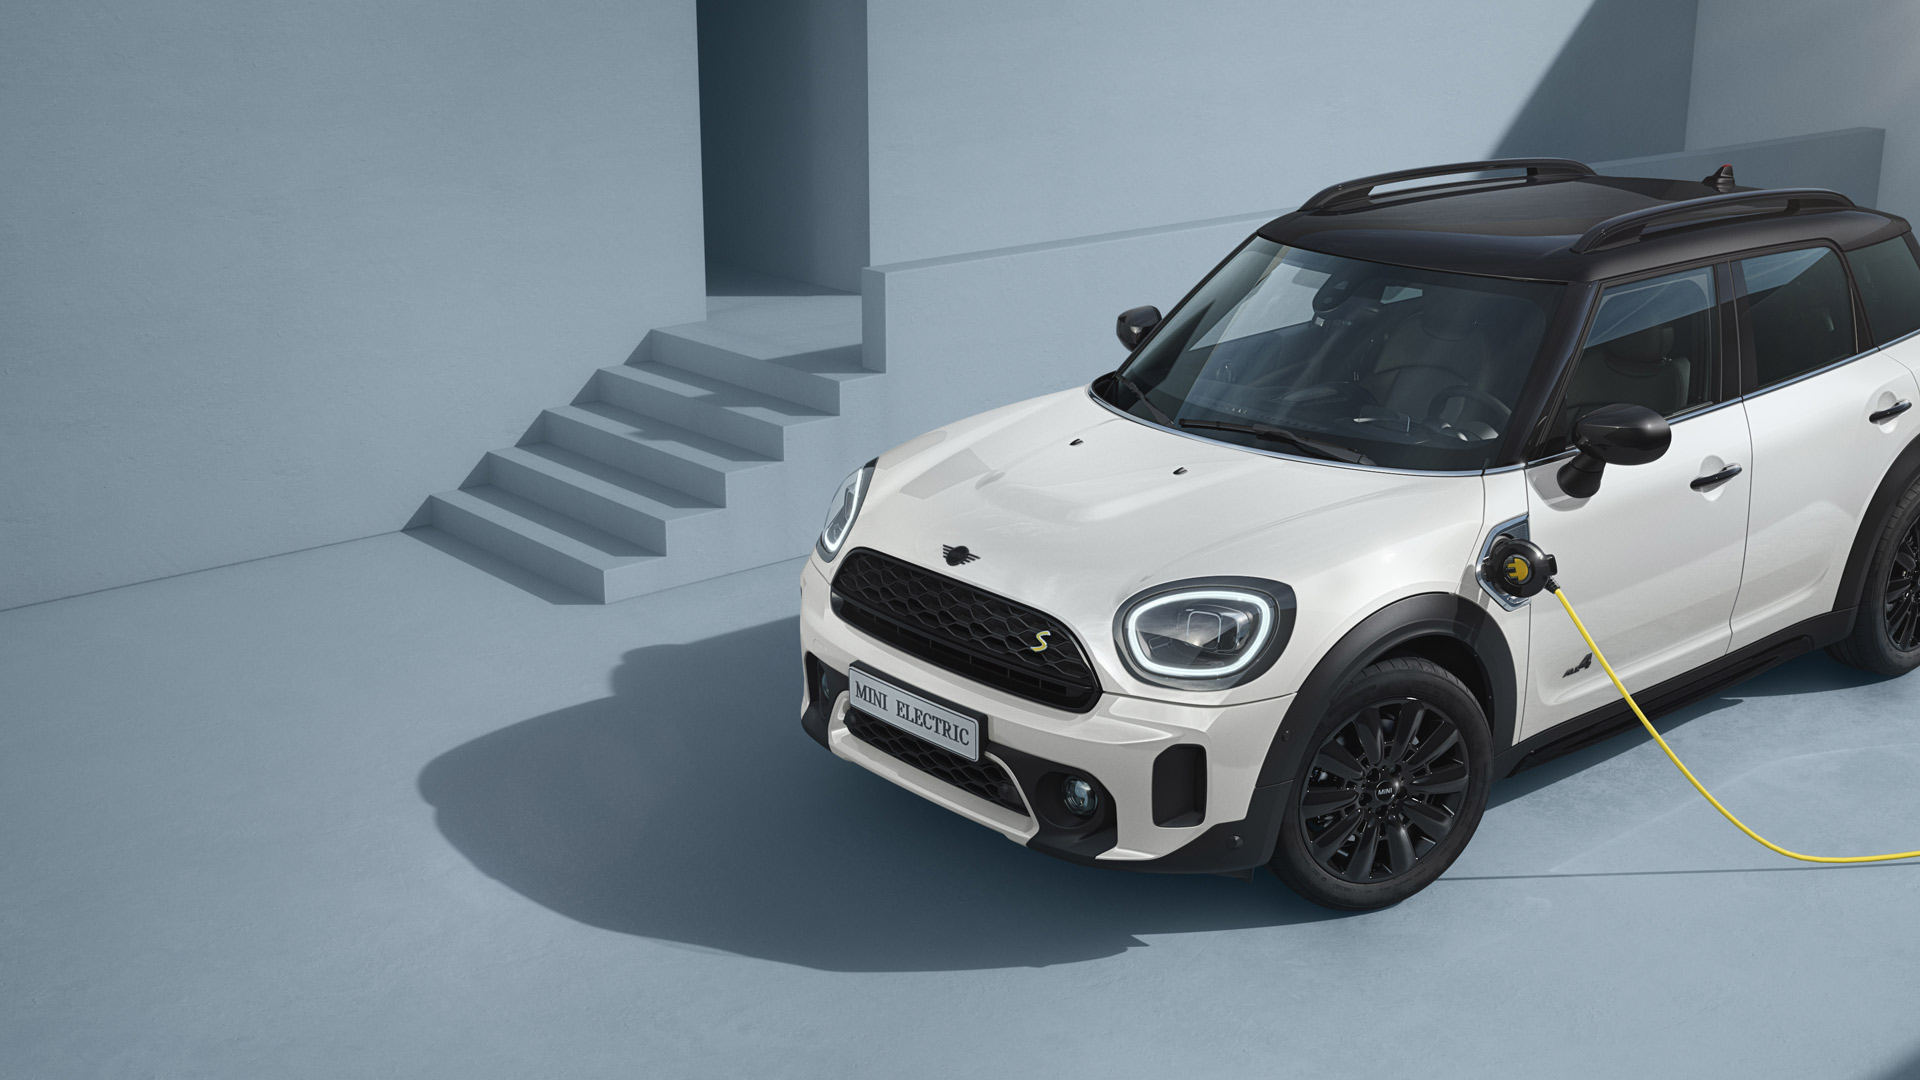 MINI Countryman Hybrid – side view – silver and yellow